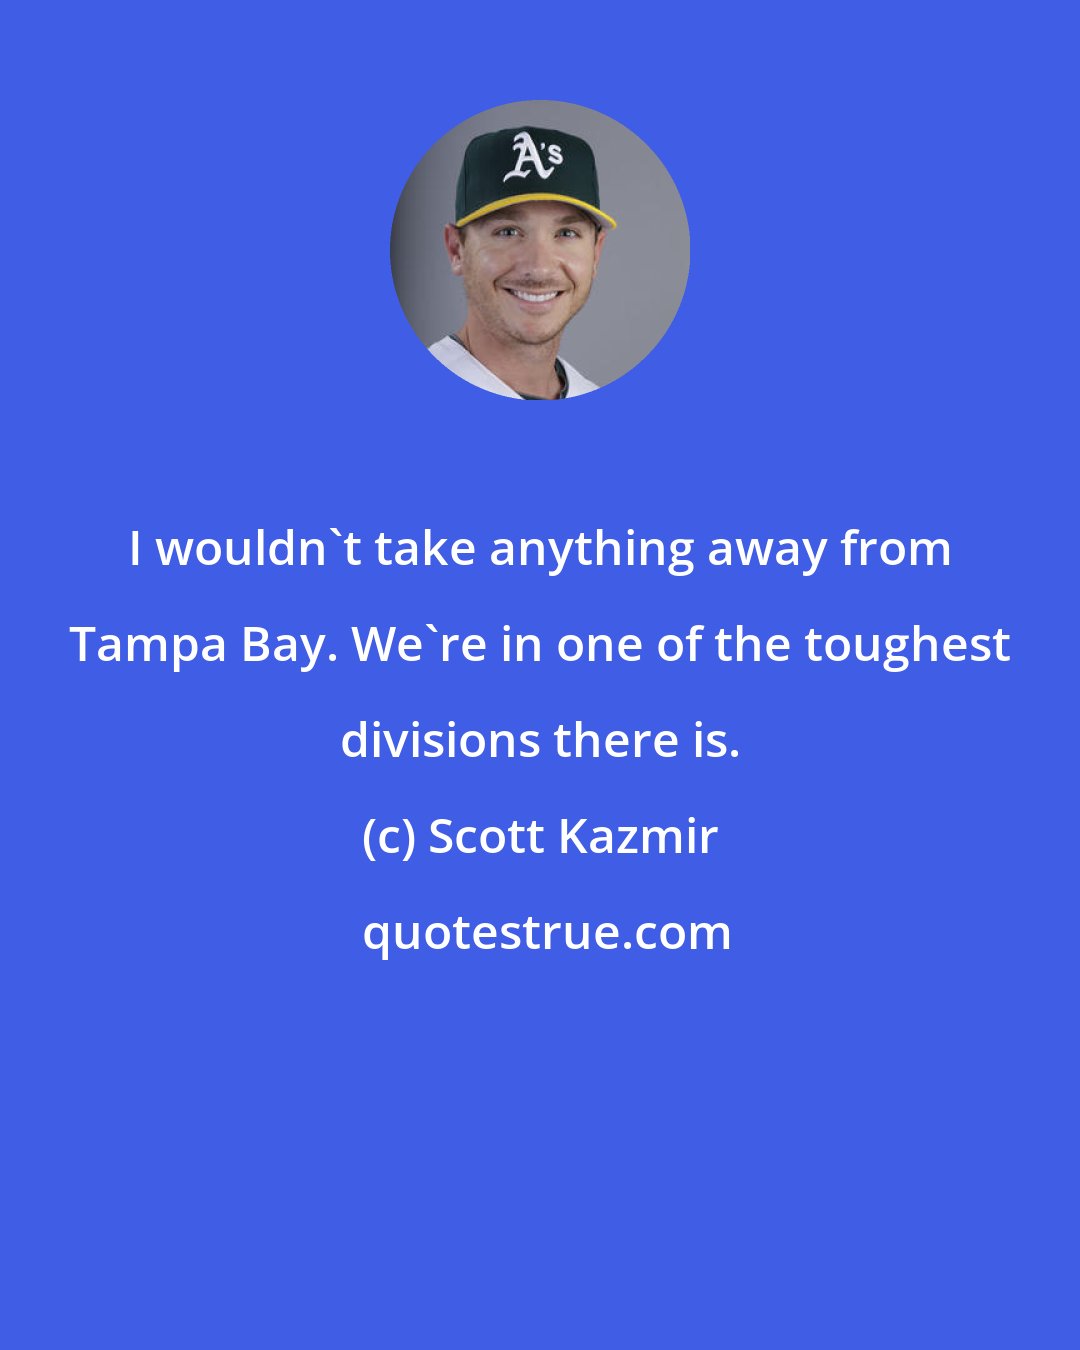 Scott Kazmir: I wouldn't take anything away from Tampa Bay. We're in one of the toughest divisions there is.